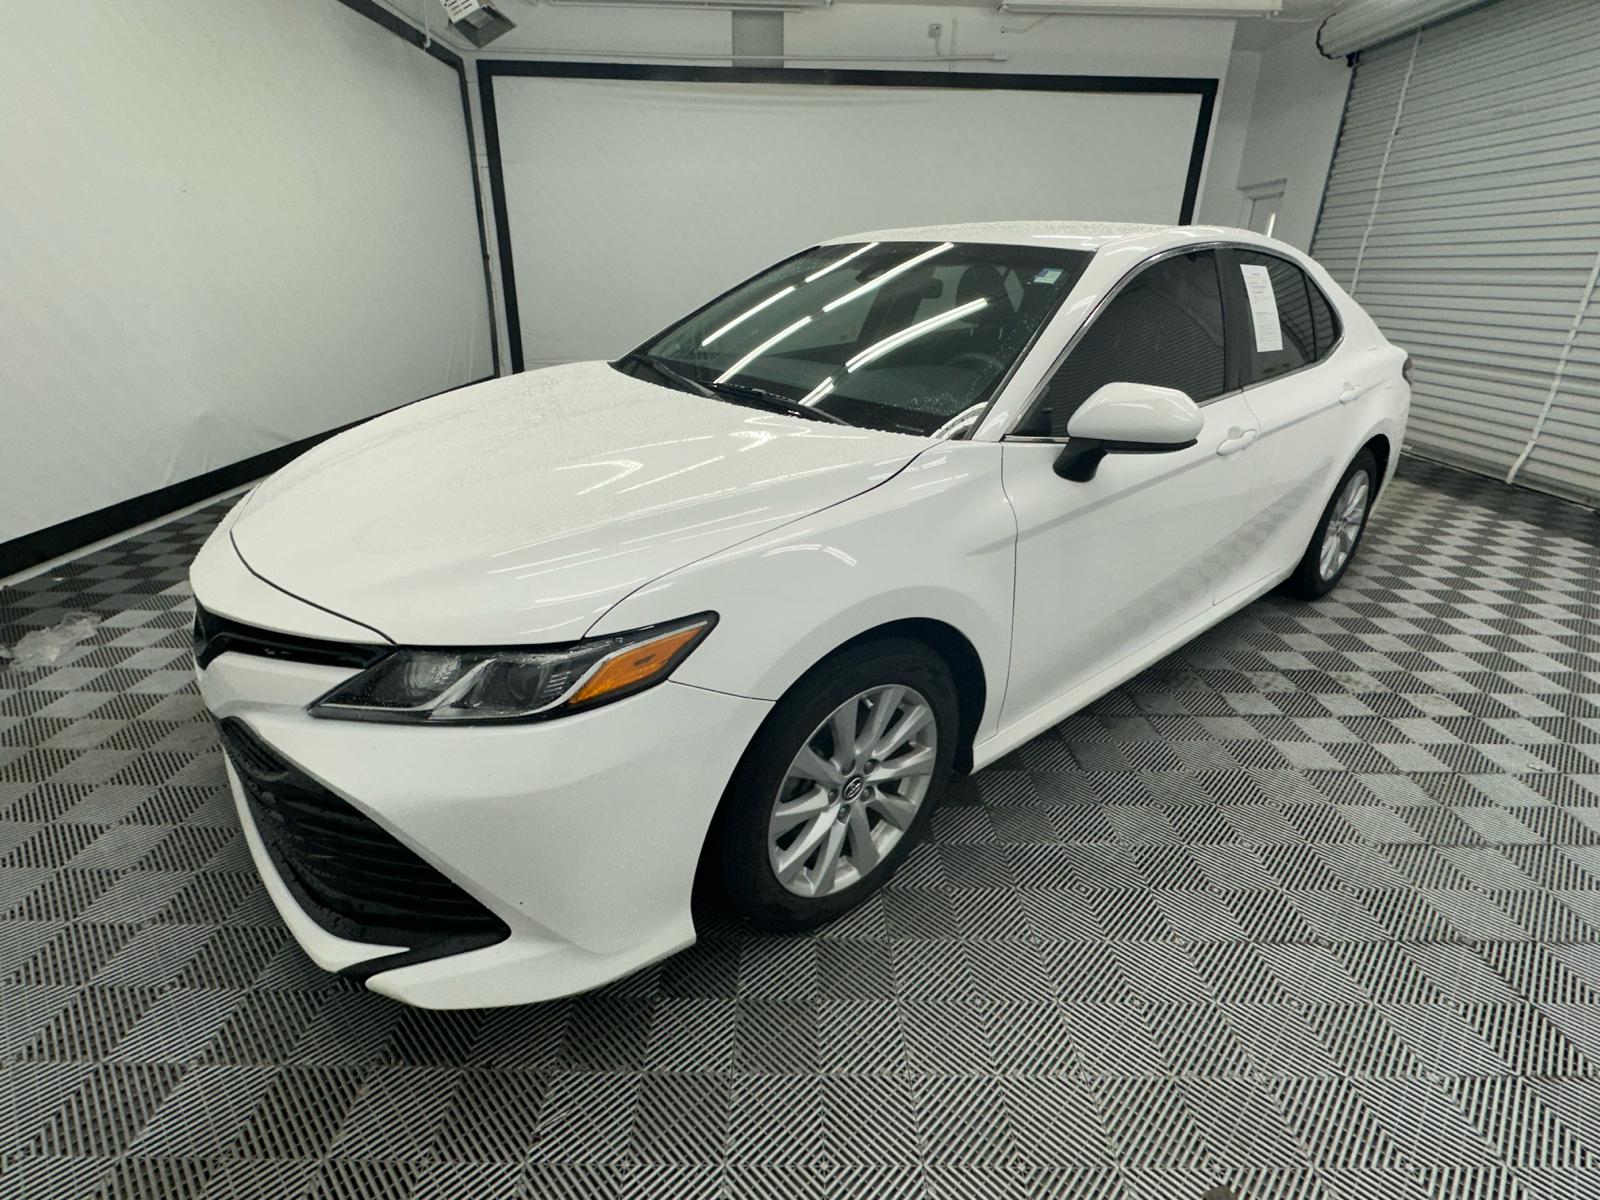 2018 Toyota Camry LE 1